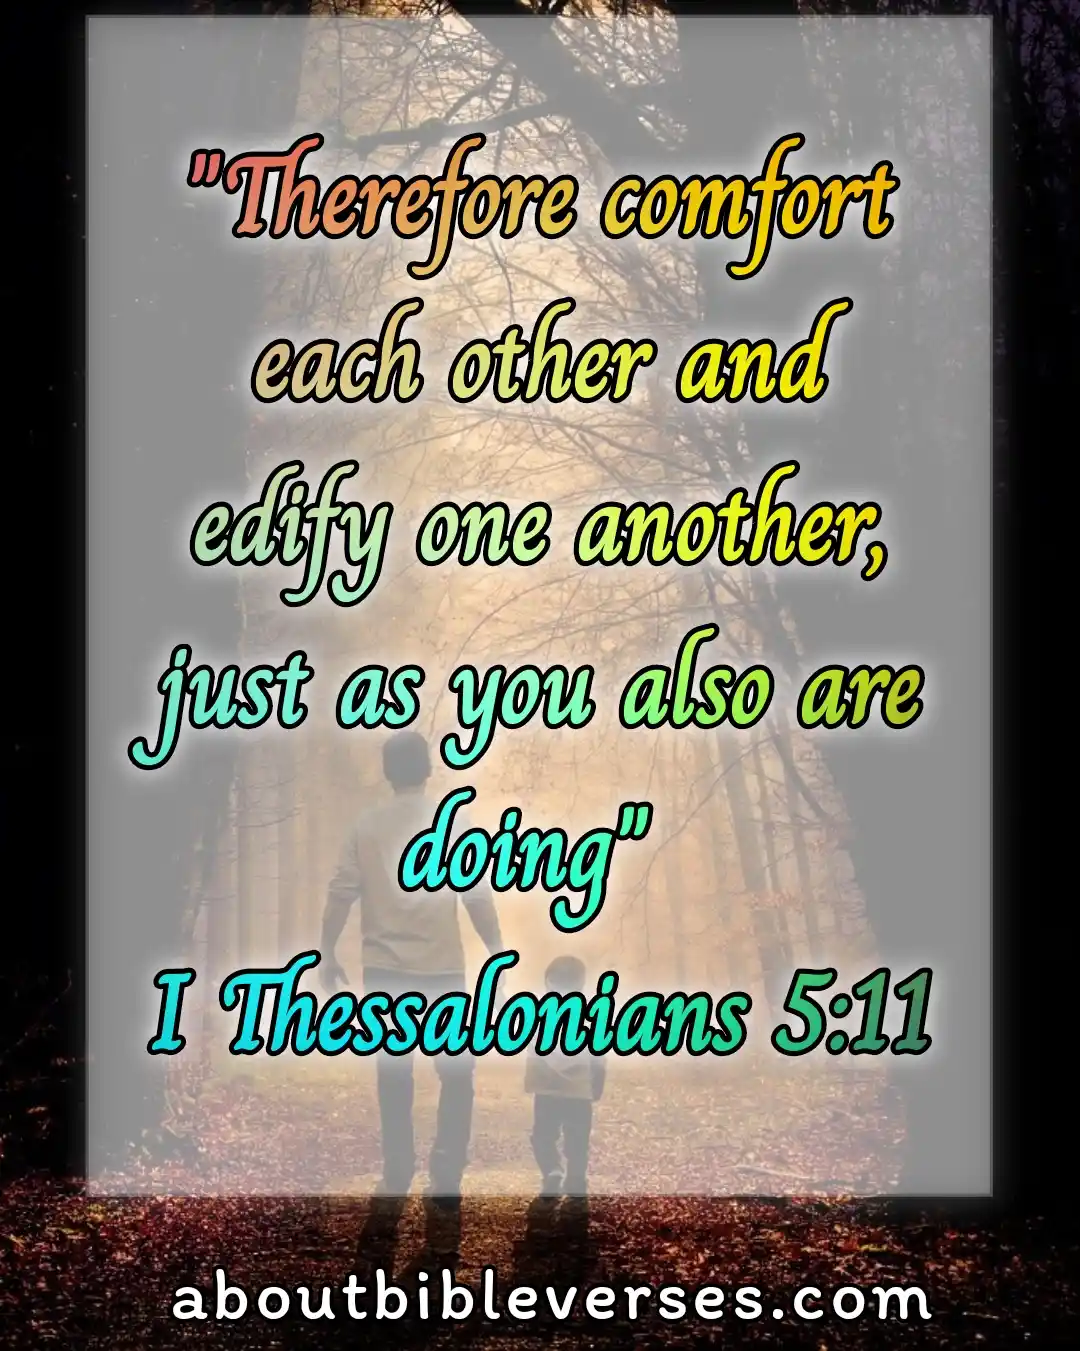 Bible Verses About Unity And Working Together (1 Thessalonians 5:11)